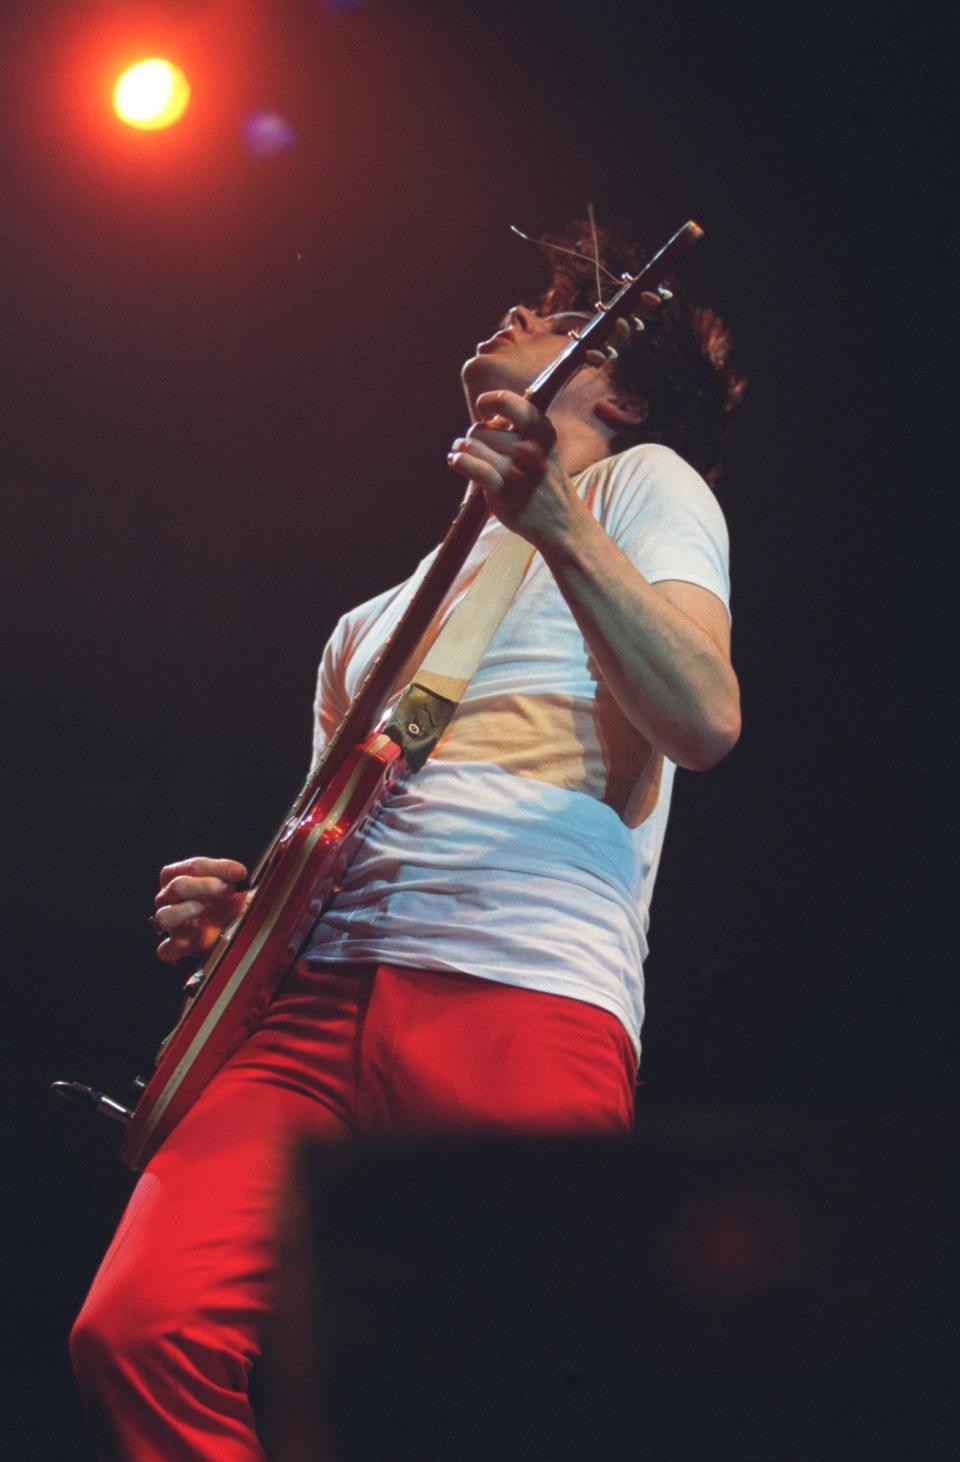 Jack White of the native Detroit rock band The White Stripes performs the first of two sold-out shows Wednesday night, May 22, 2002 at the Royal Oak Theater in Royal Oak.